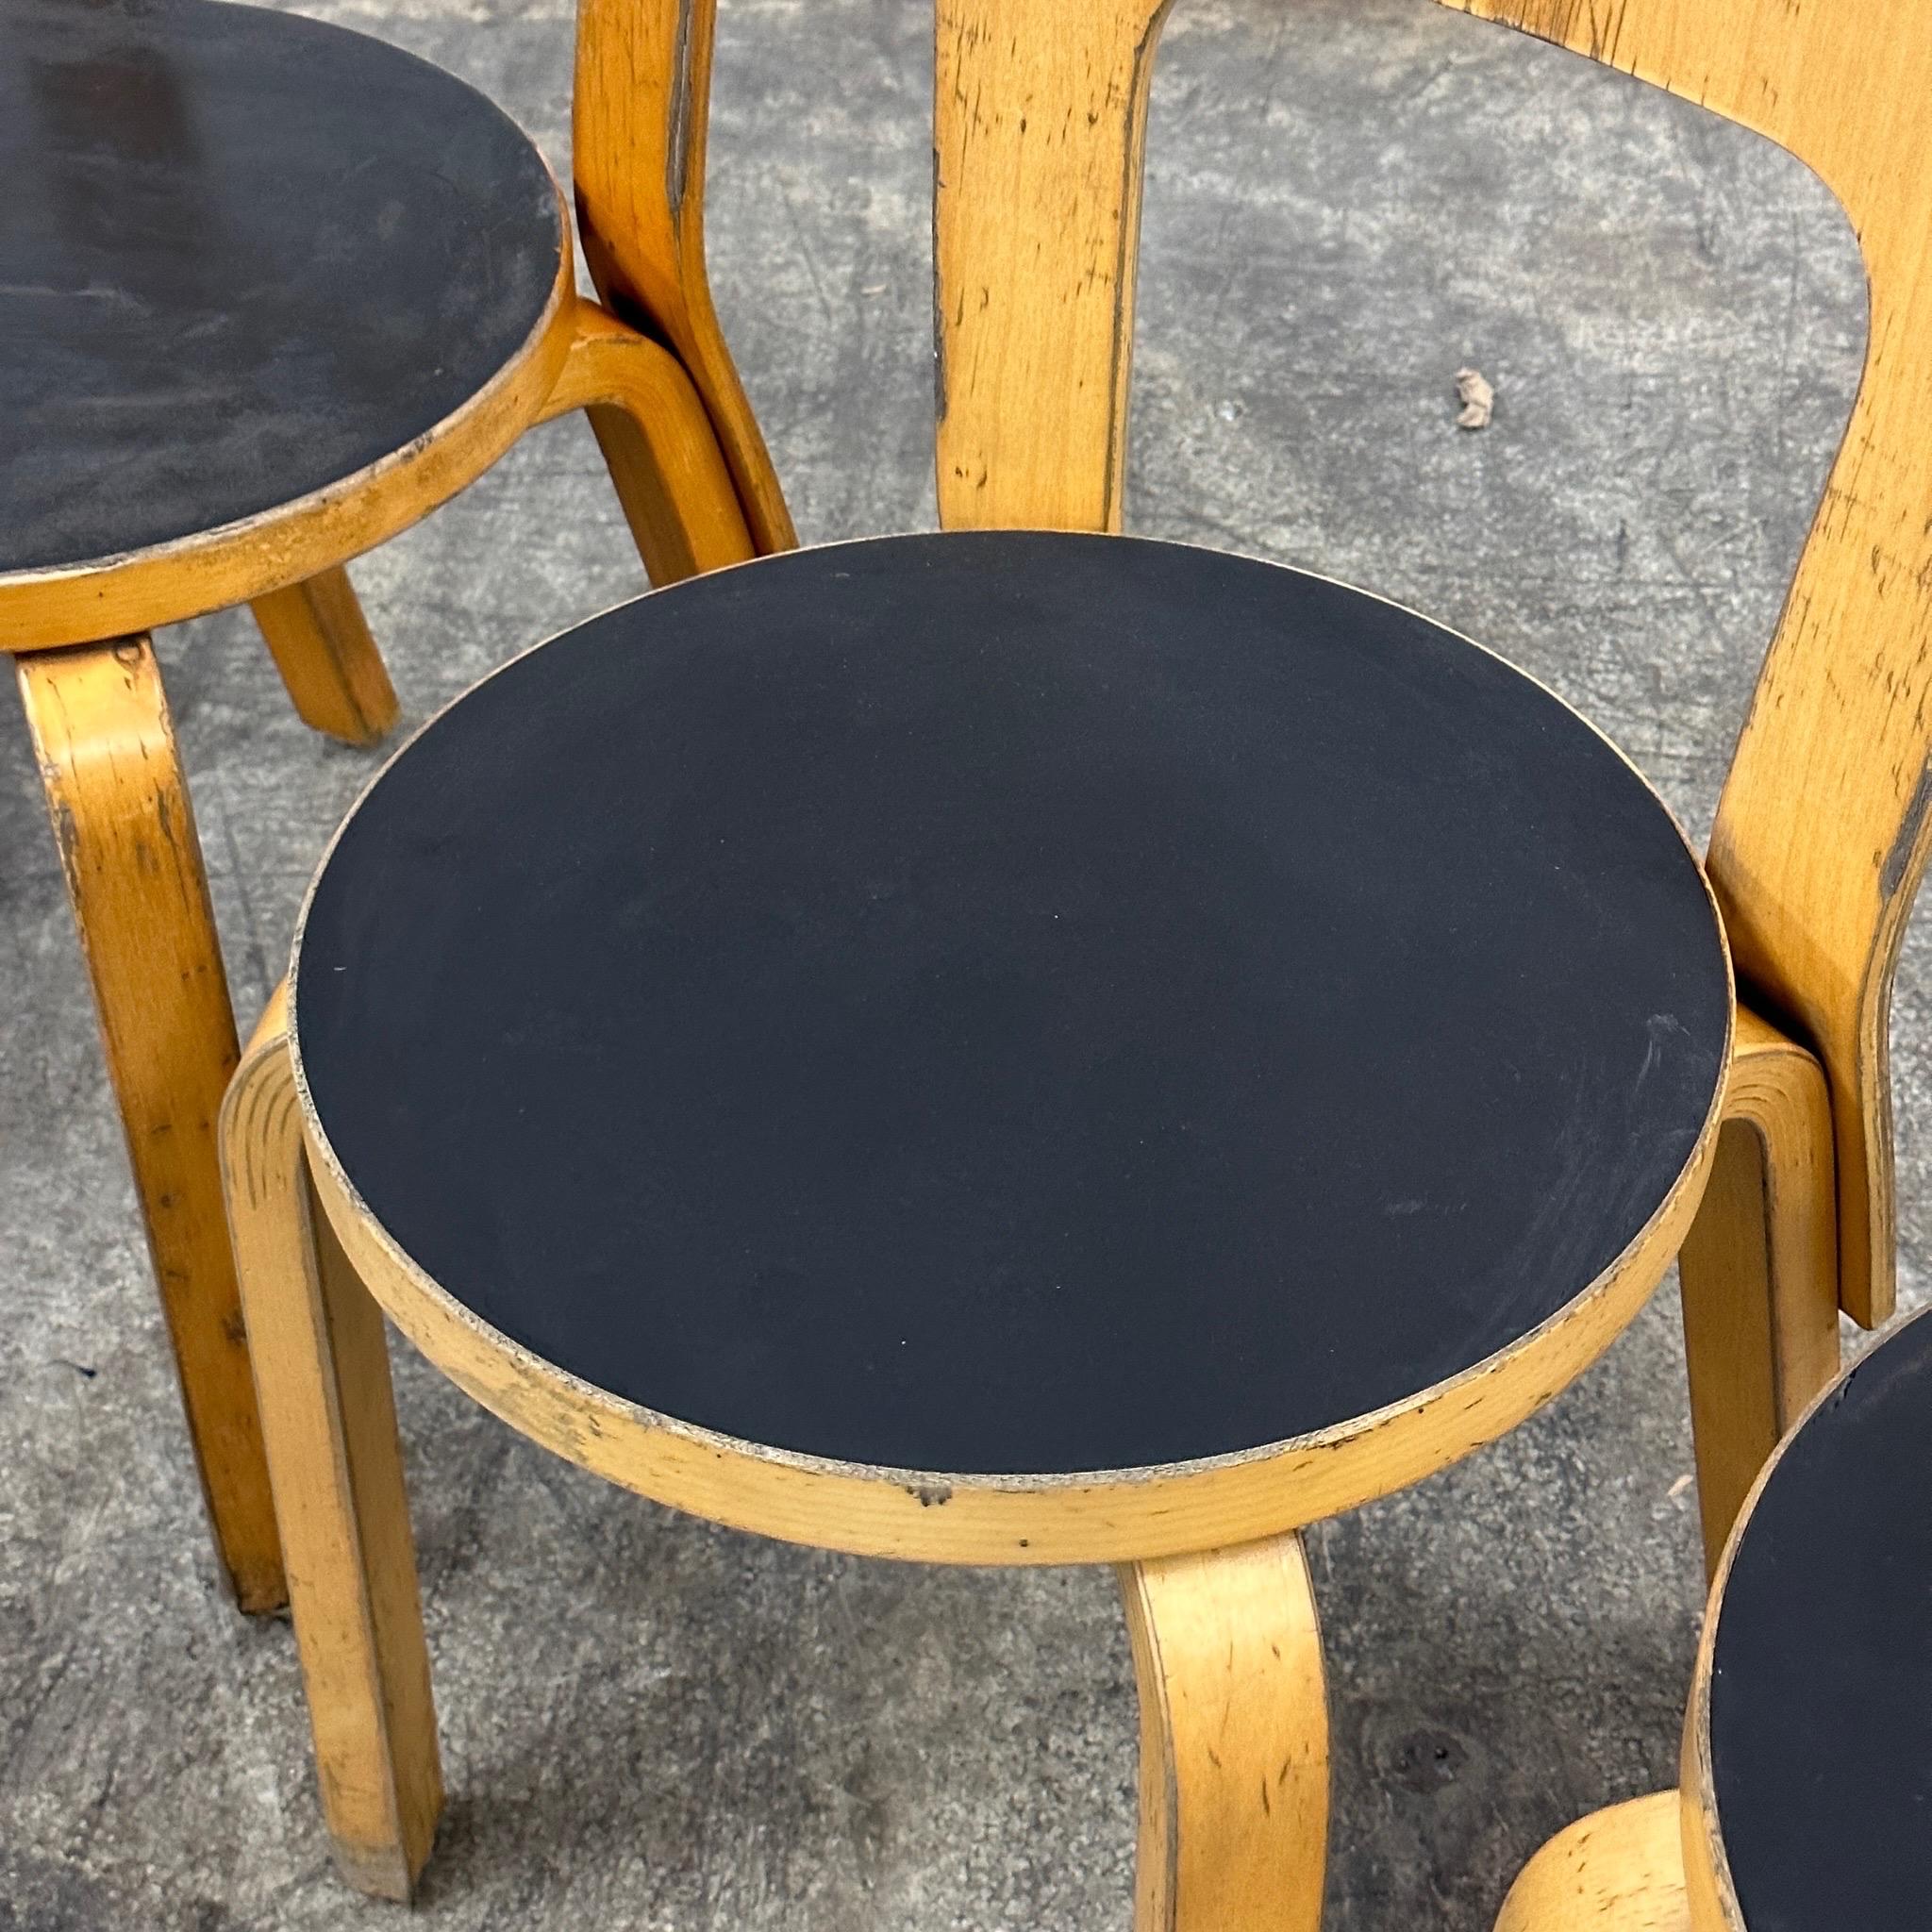 Model 66 Chairs by Alvar Aalto for Artek In Fair Condition For Sale In Chicago, IL